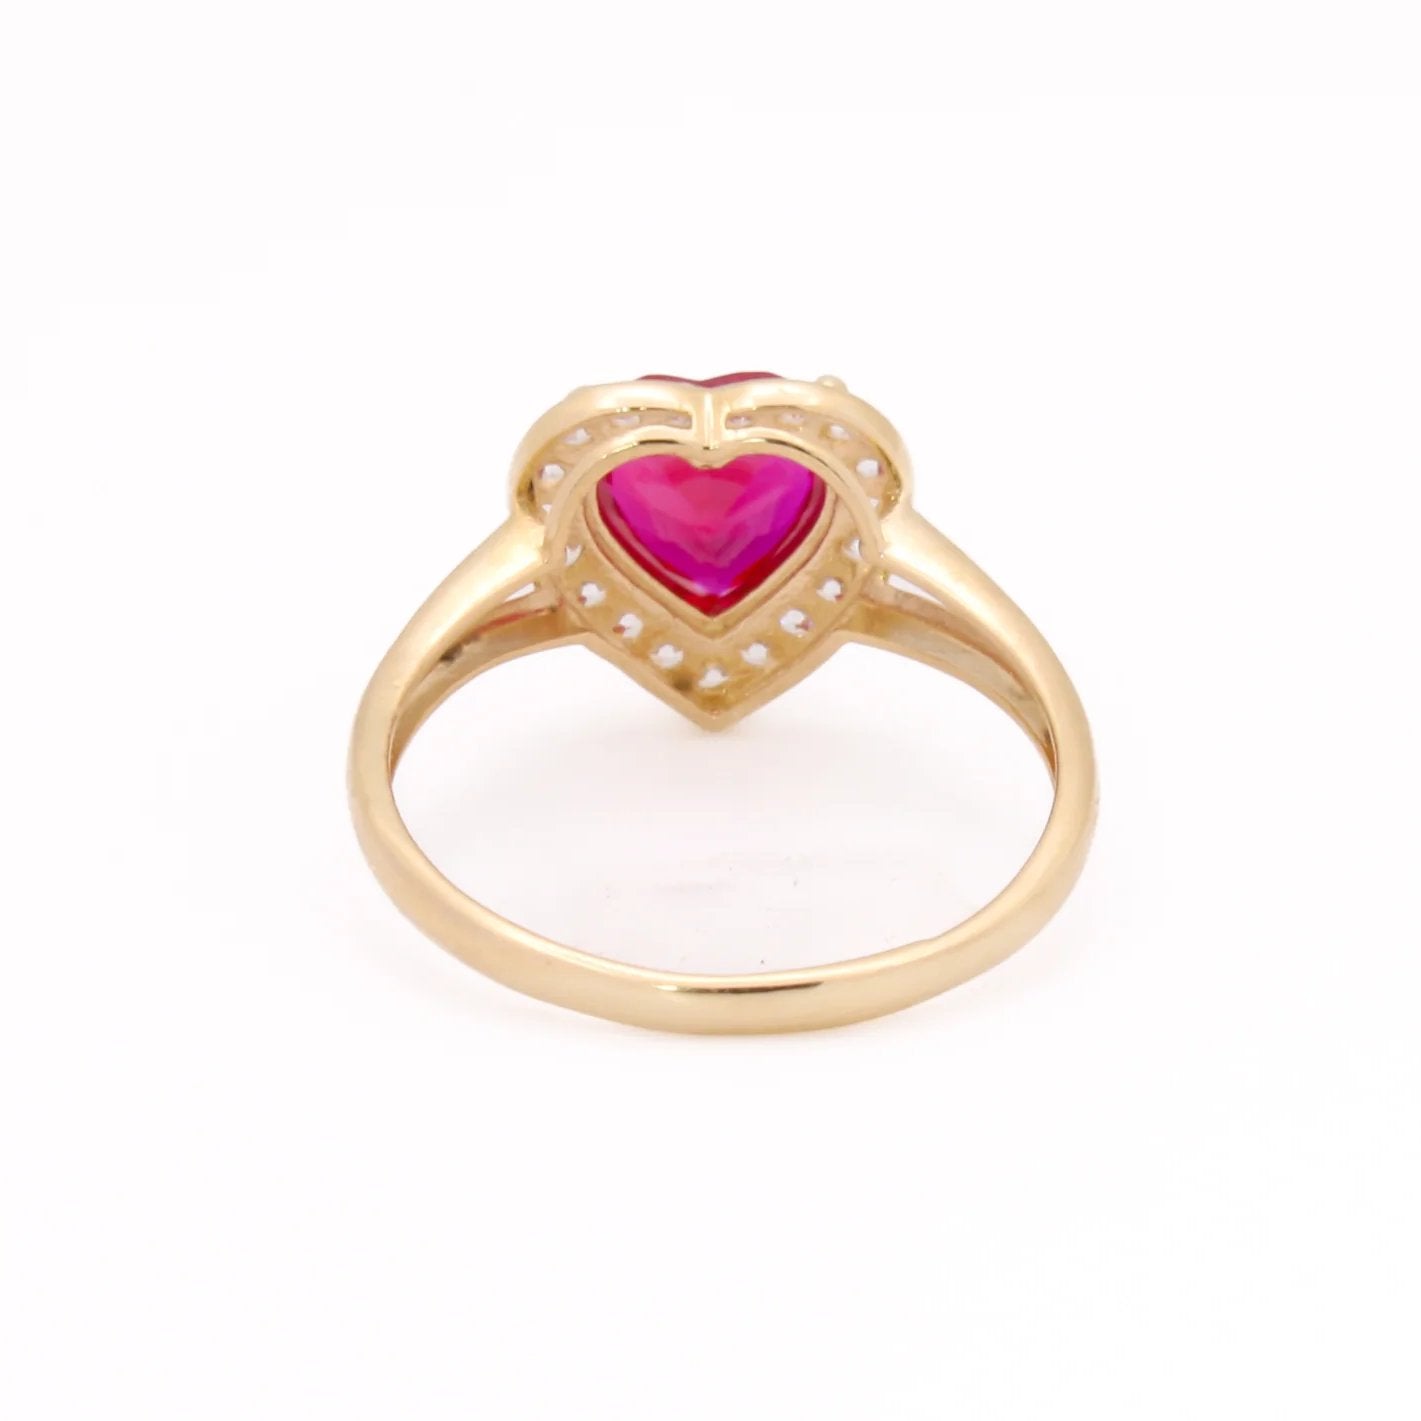 Promise x Halo Heart Ring - Red White - 14k